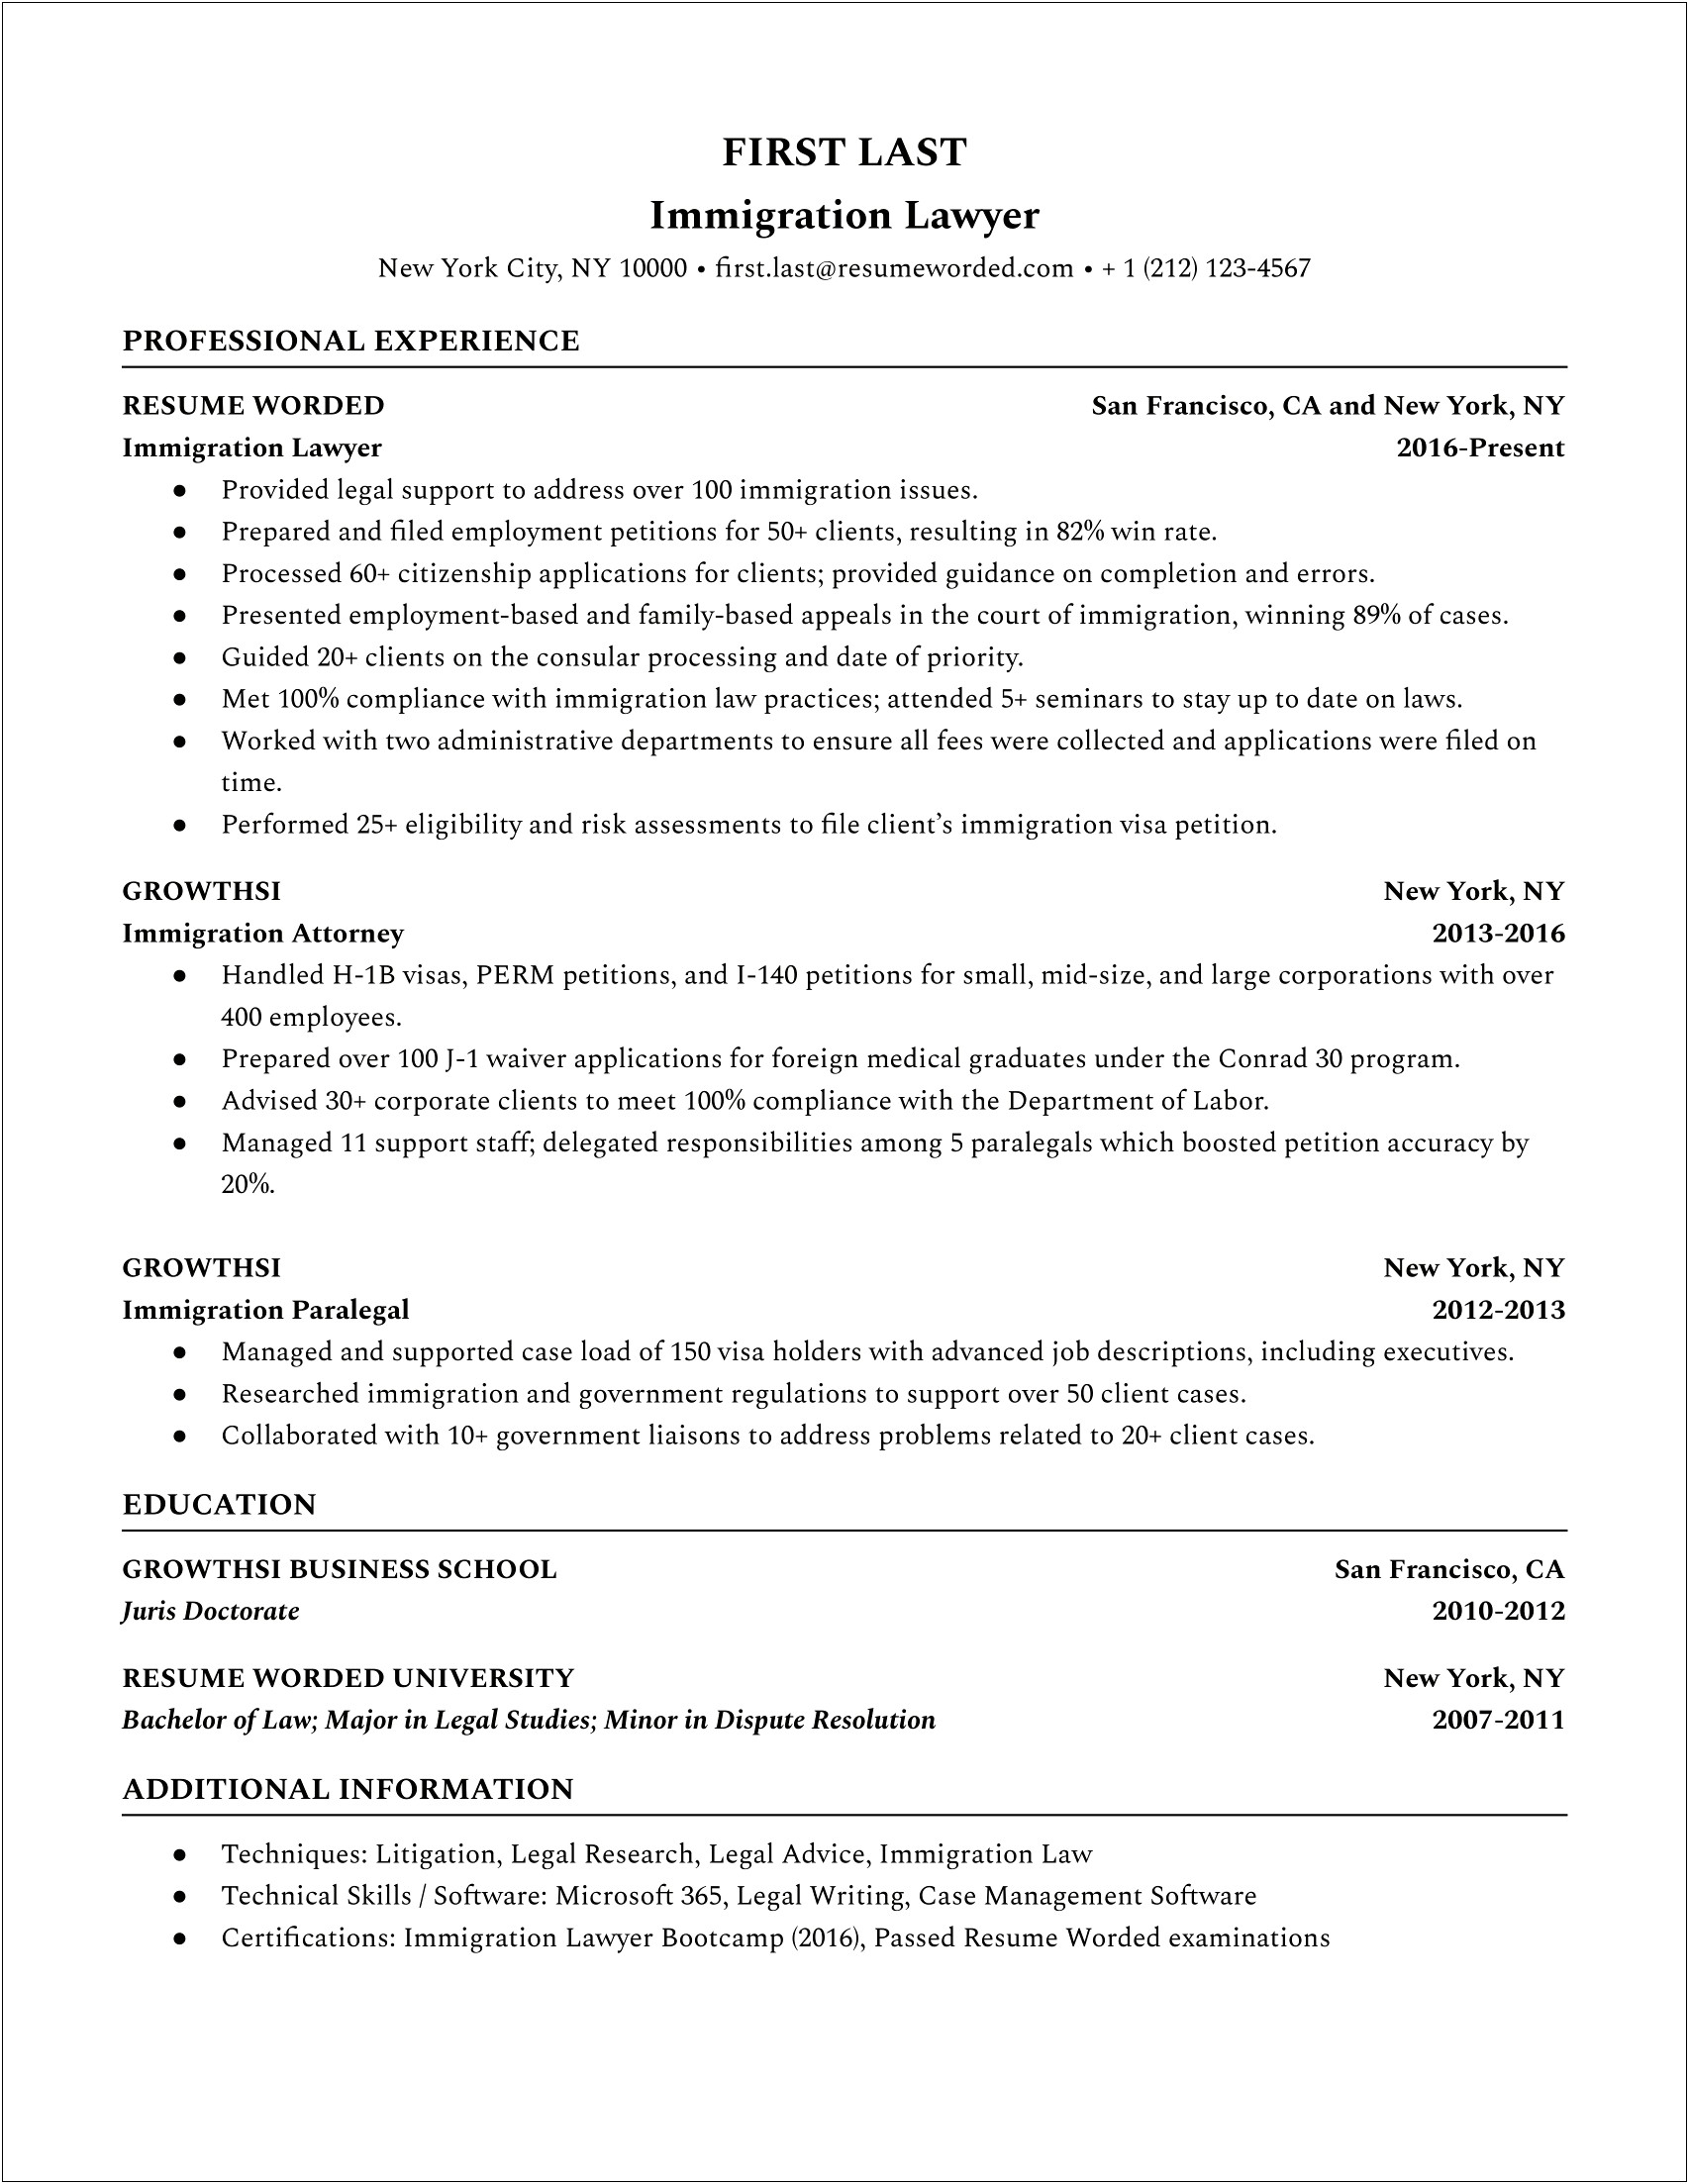 Resume Templates For Law School Applications